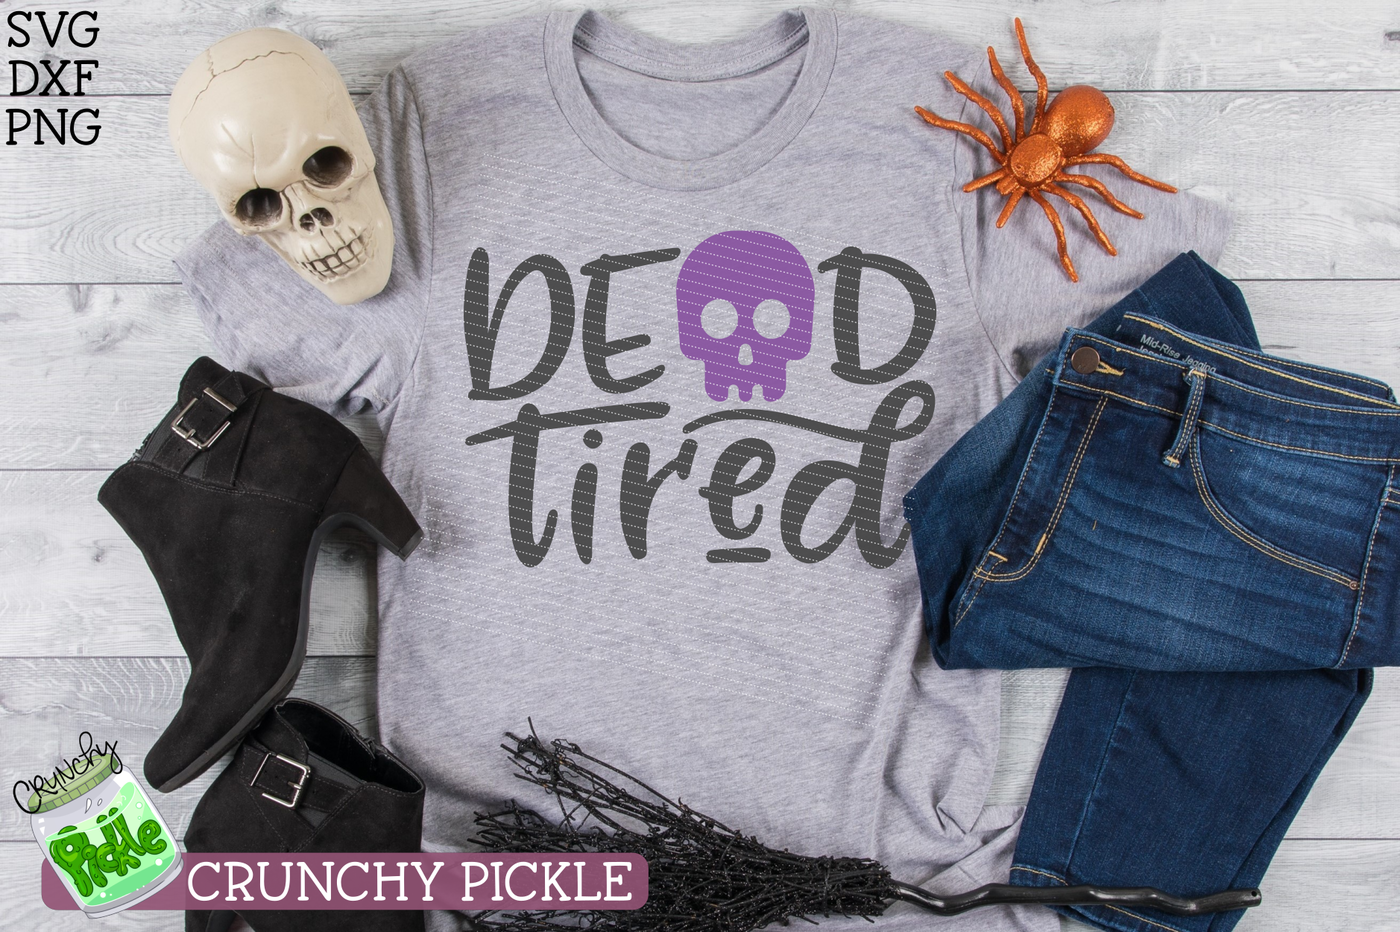 Dead Tired Svg Cutting File By Crunchy Pickle Thehungryjpeg Com